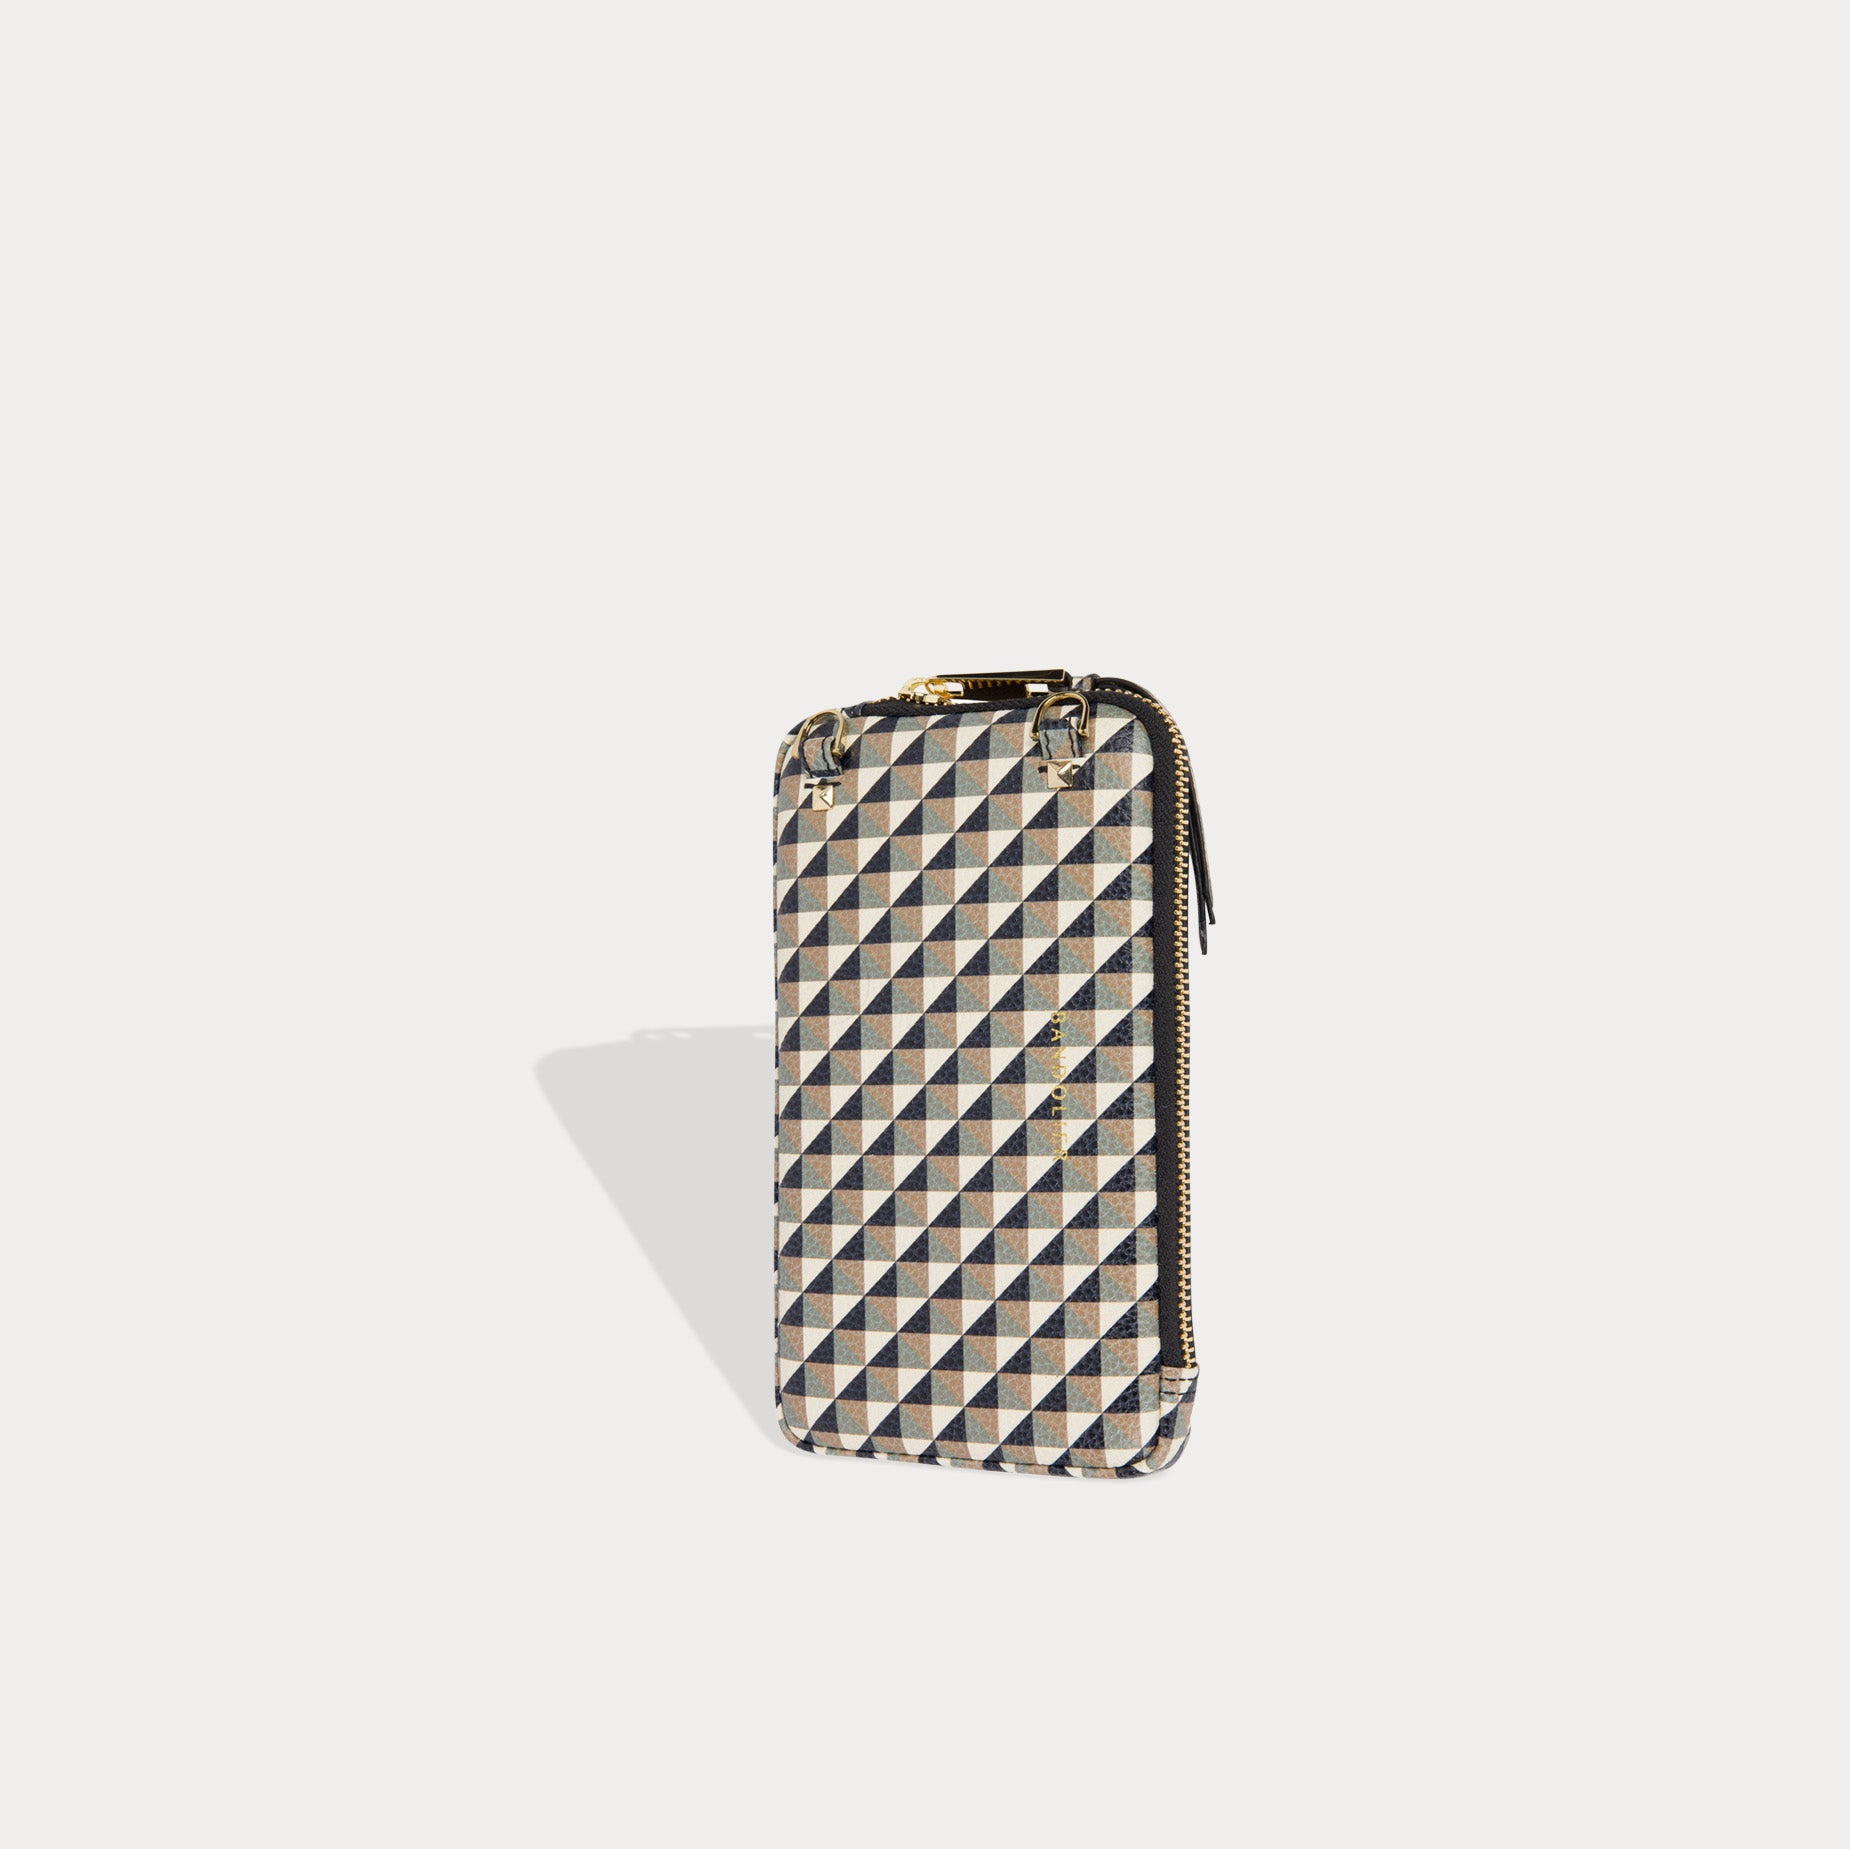 Pebble Leather Expanded Zip Pouch - Multi/Gold